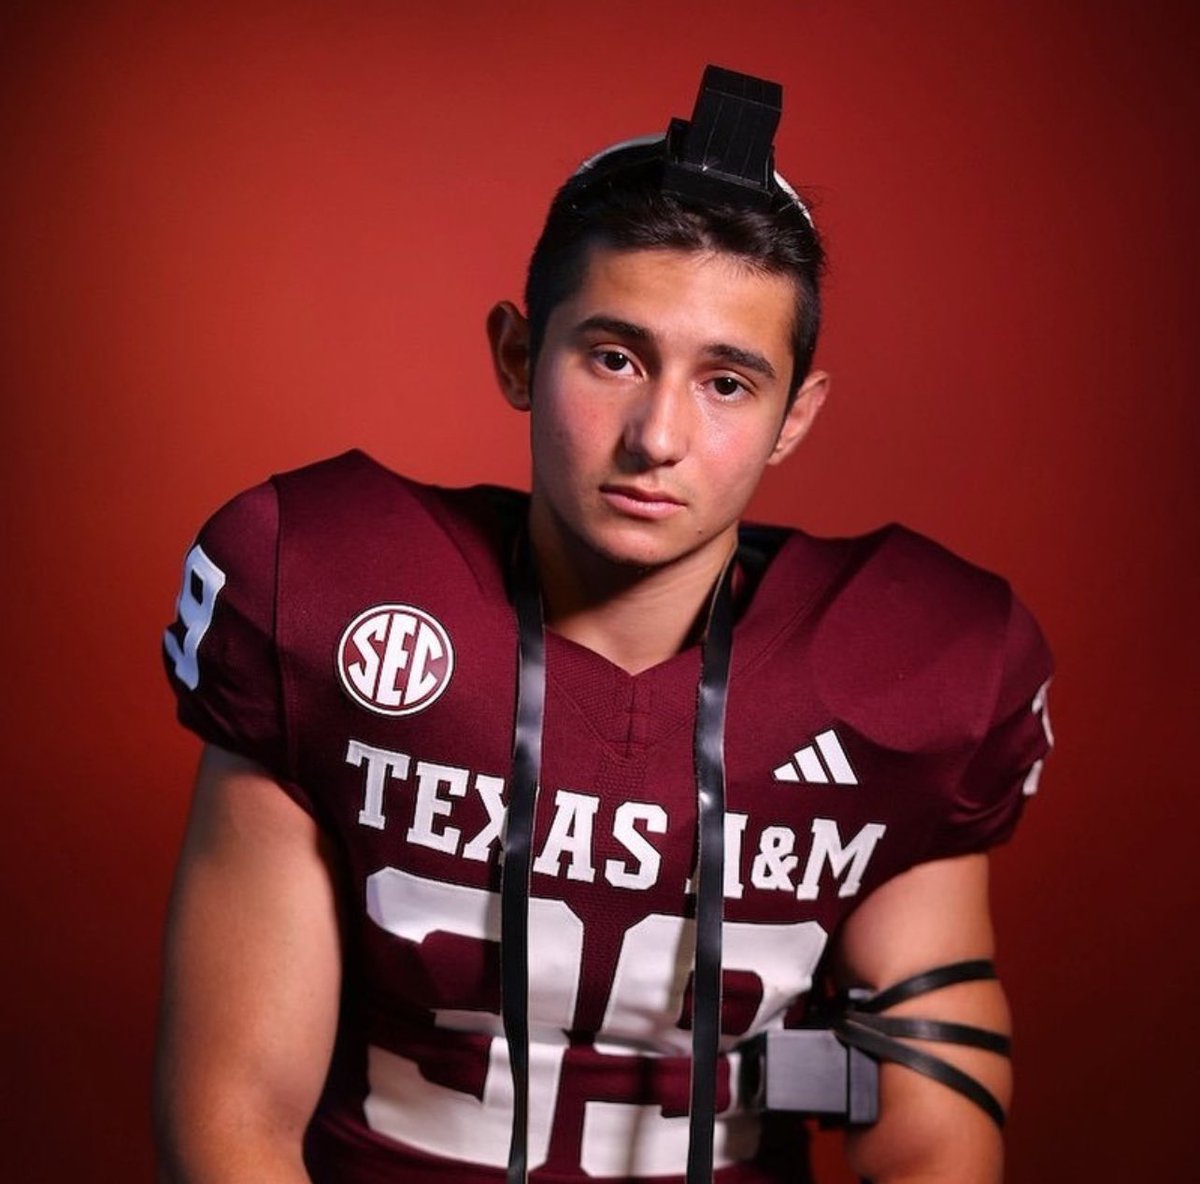 Sam Salz, a football player at Texas A&M, is believed to be the only Orthodox Jew currently playing college football. He wears a kippah under his helmet and does not participate in games on Shabbat. Photo: @sam_salz